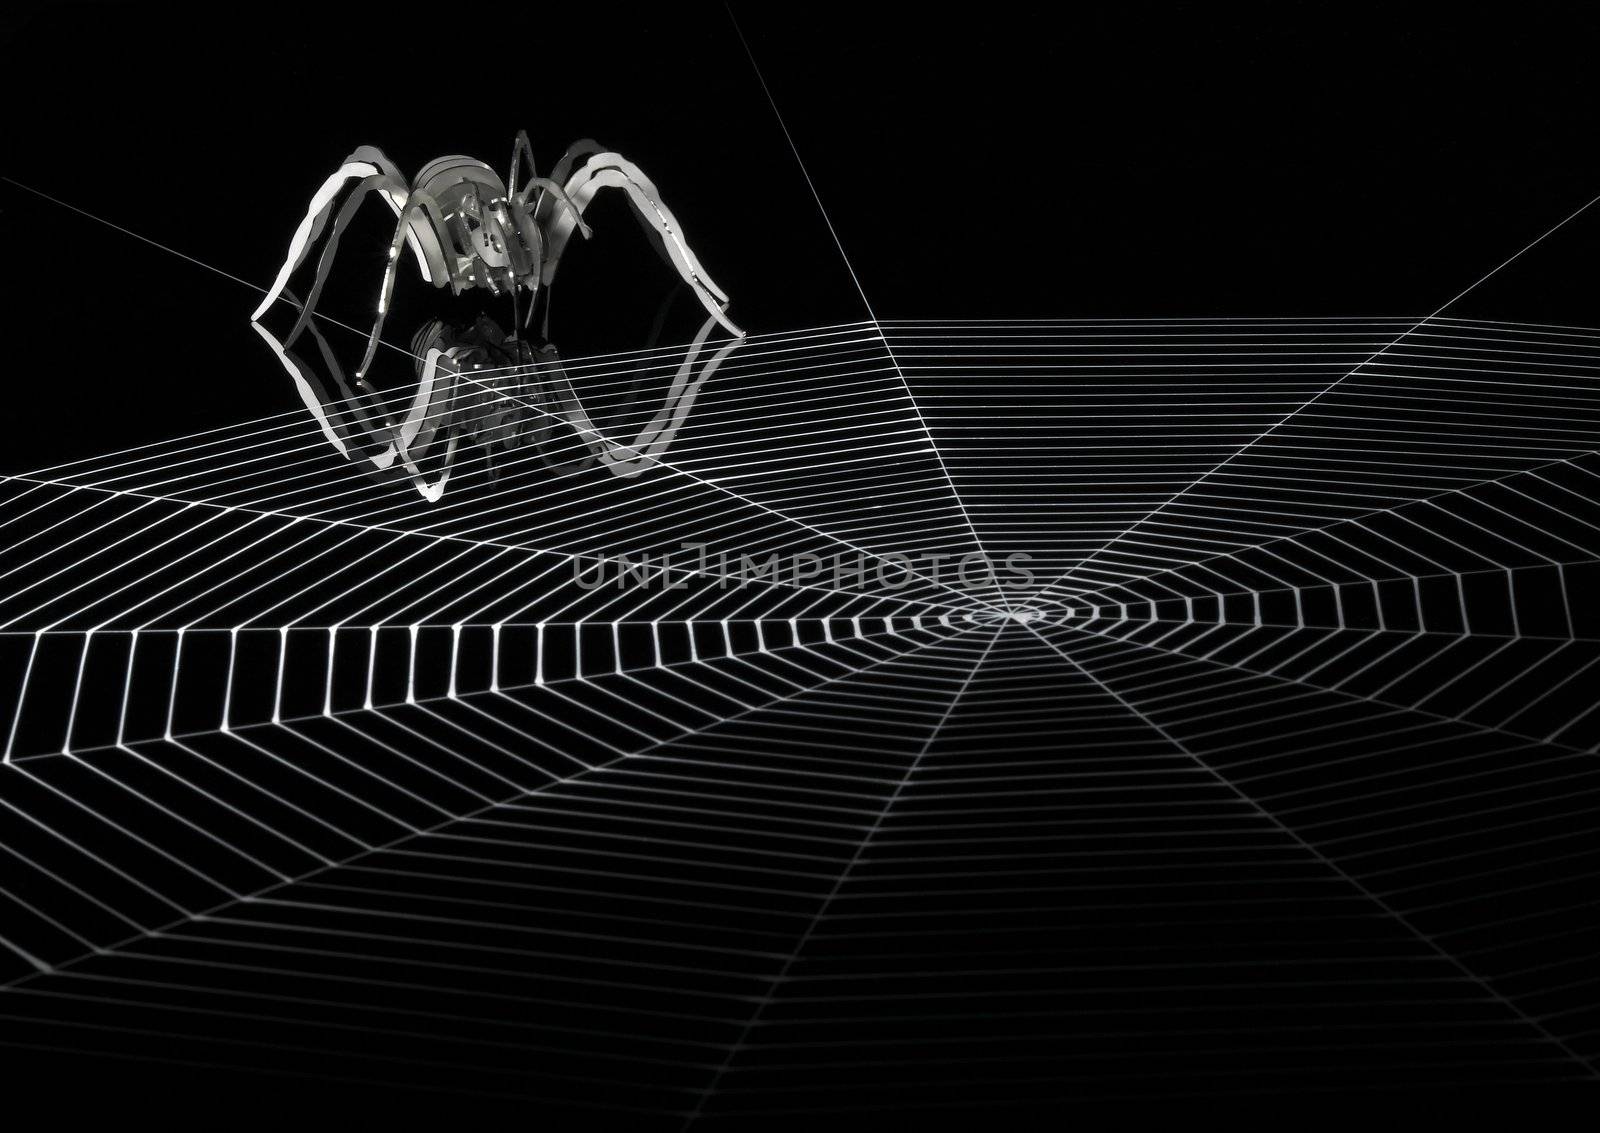 symbolic spider made of metal while lurking for prey at the edge of a painted spider web